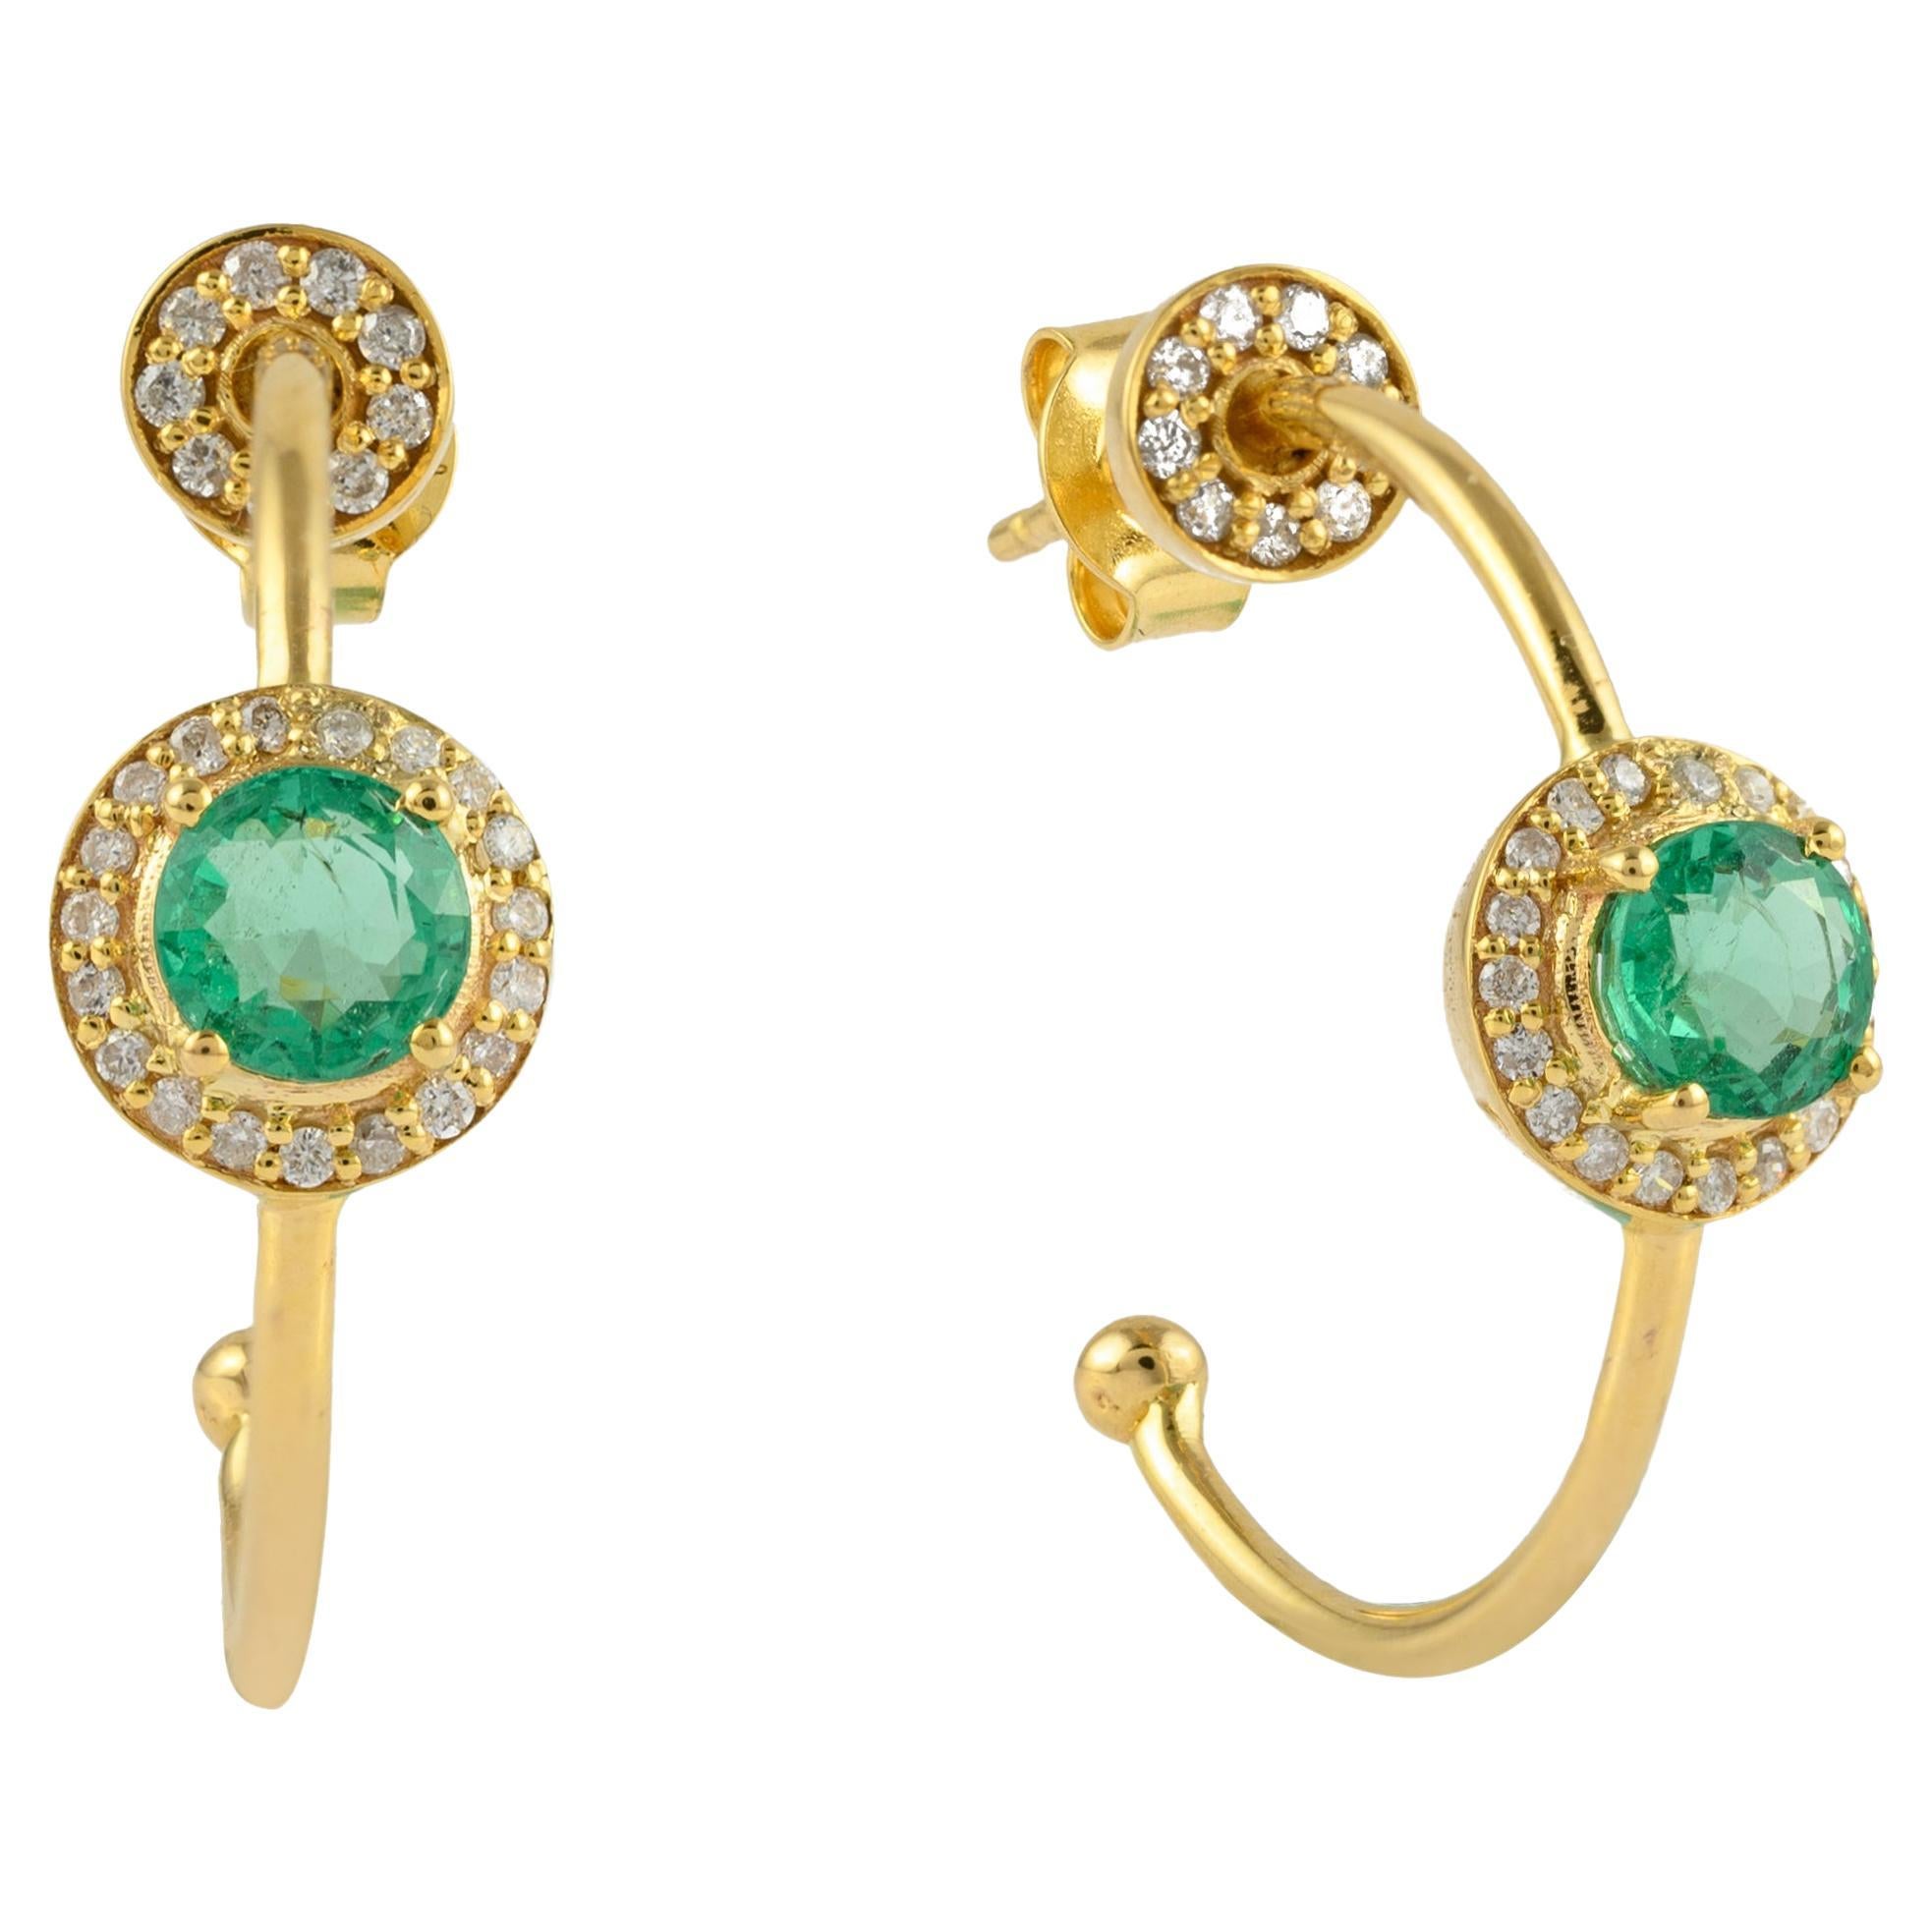 Halo Diamond and Emerald C-Hoop Earrings Made in 14k Solid Yellow Gold For Sale